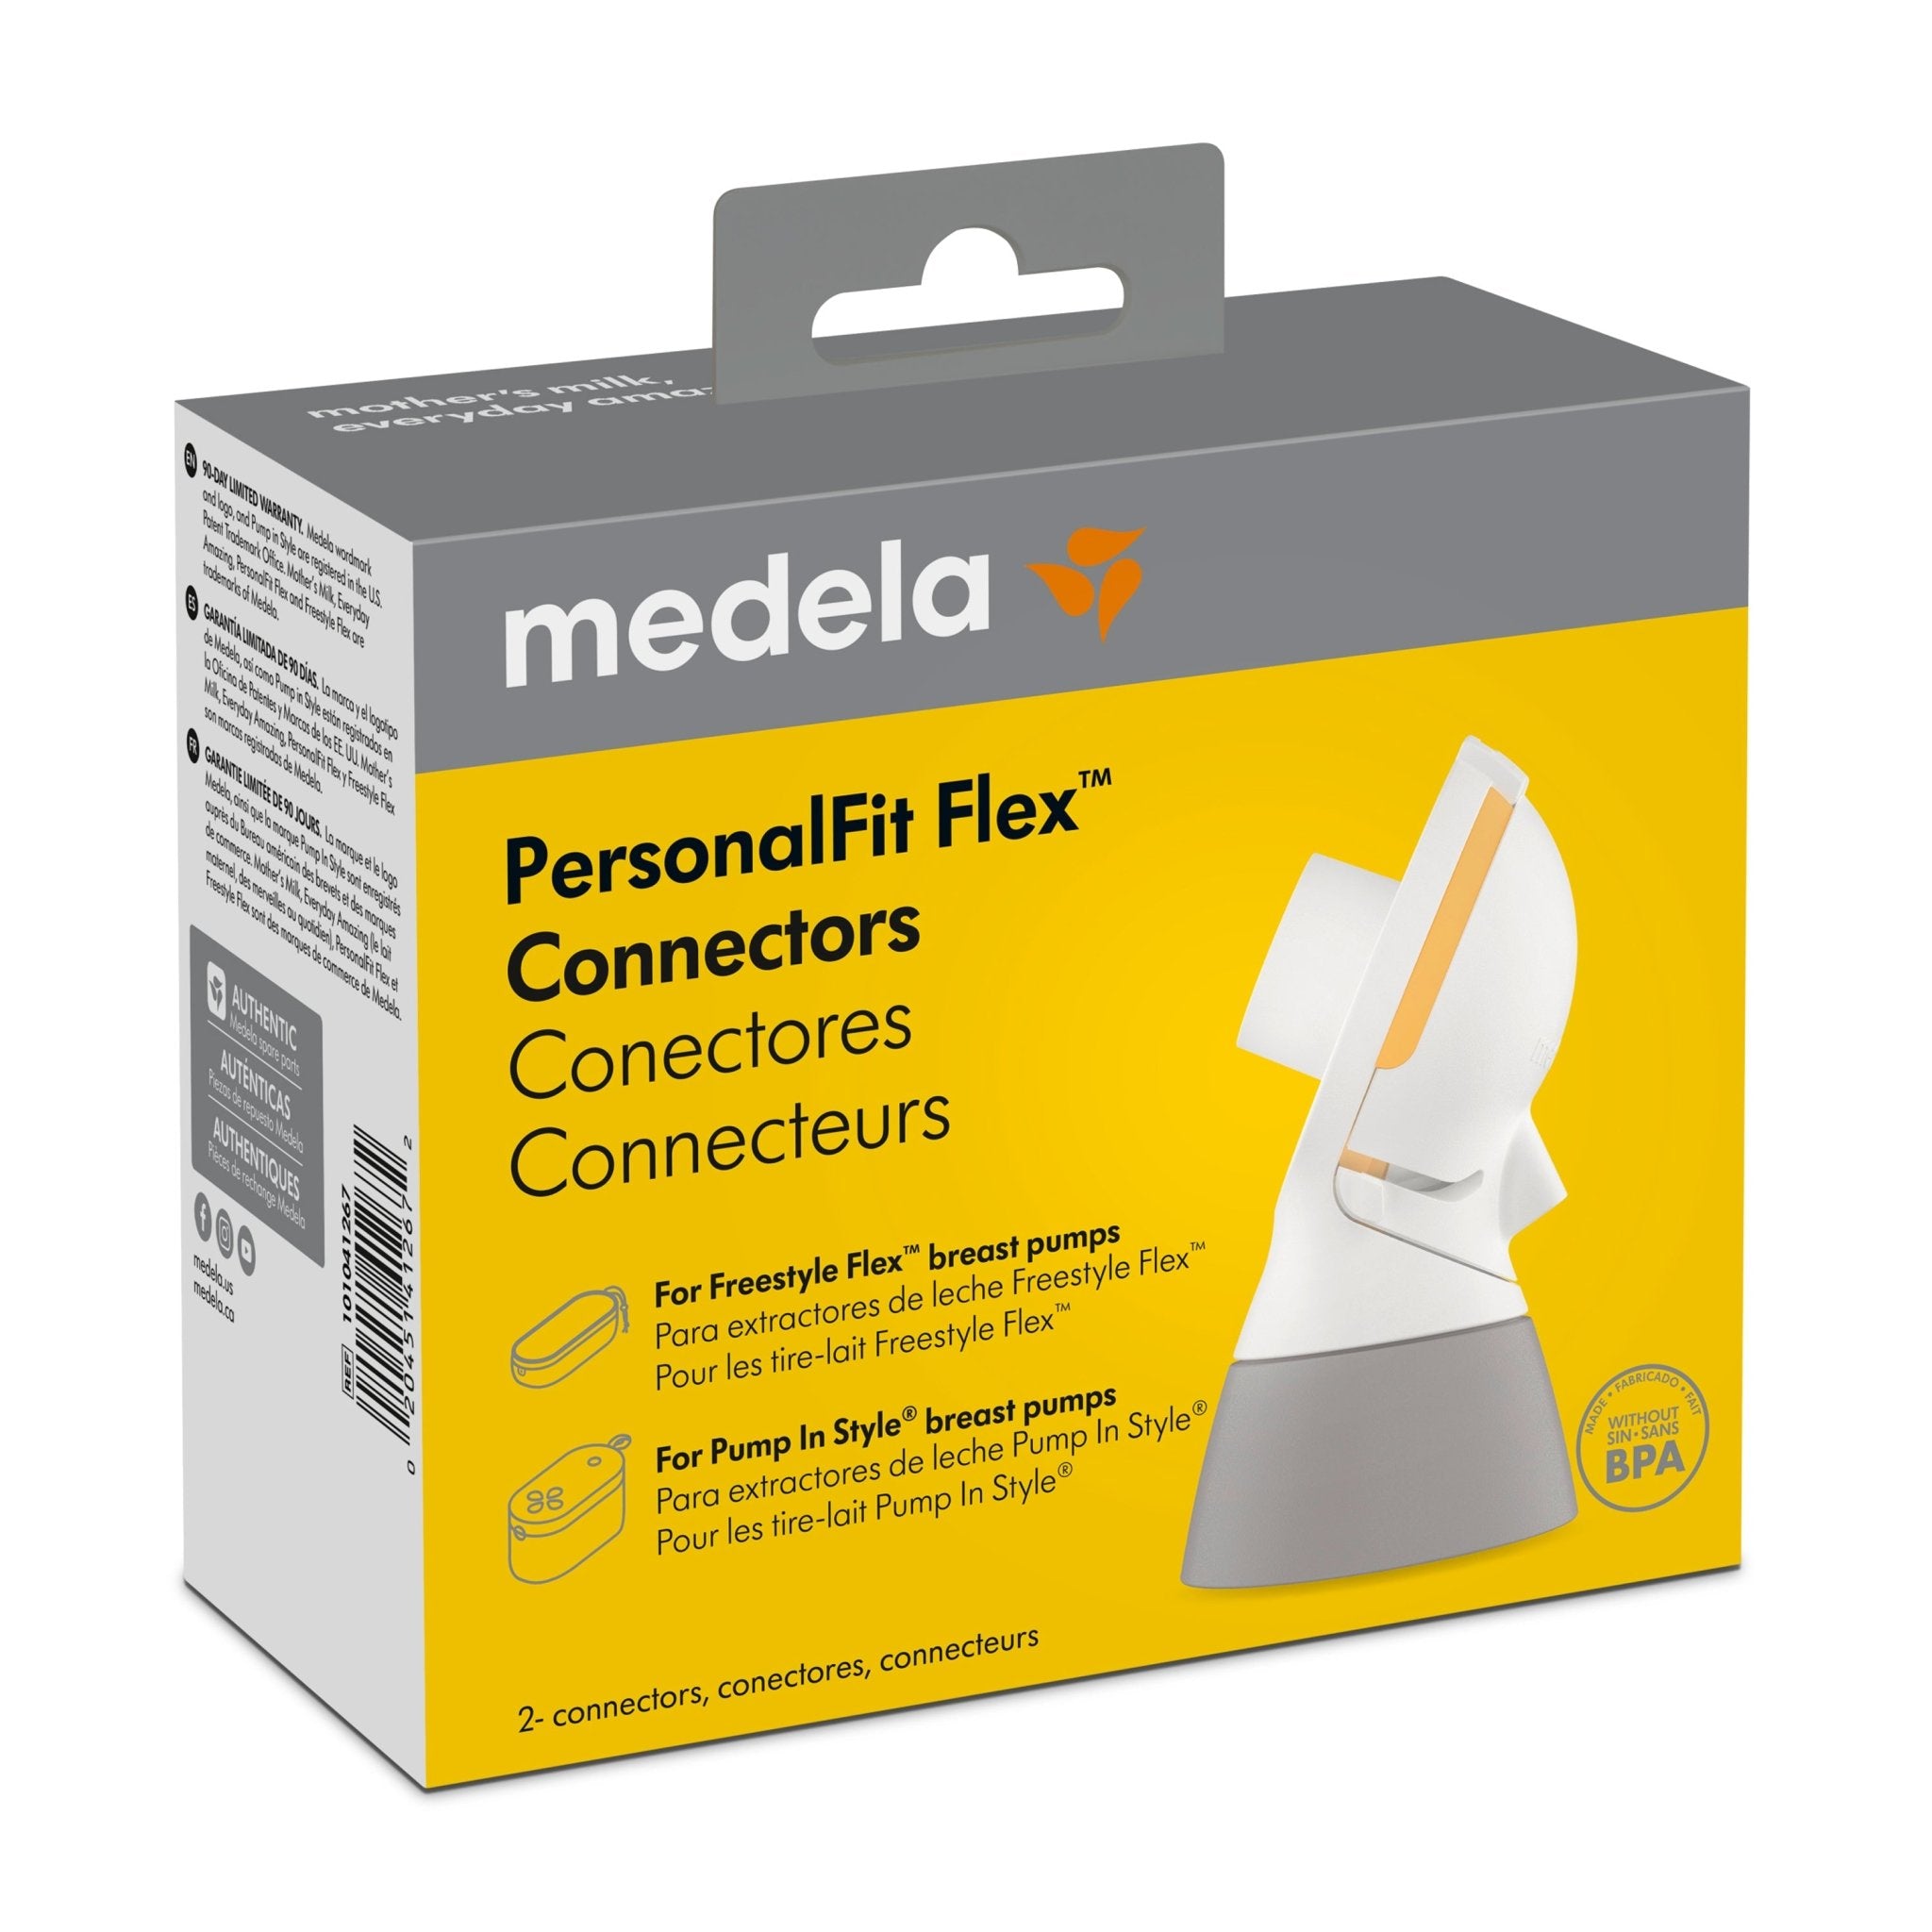 Medela PersonalFit Flex Connectors for Pump In Style MaxFlow and Freestyle Flex, -- ANB Baby